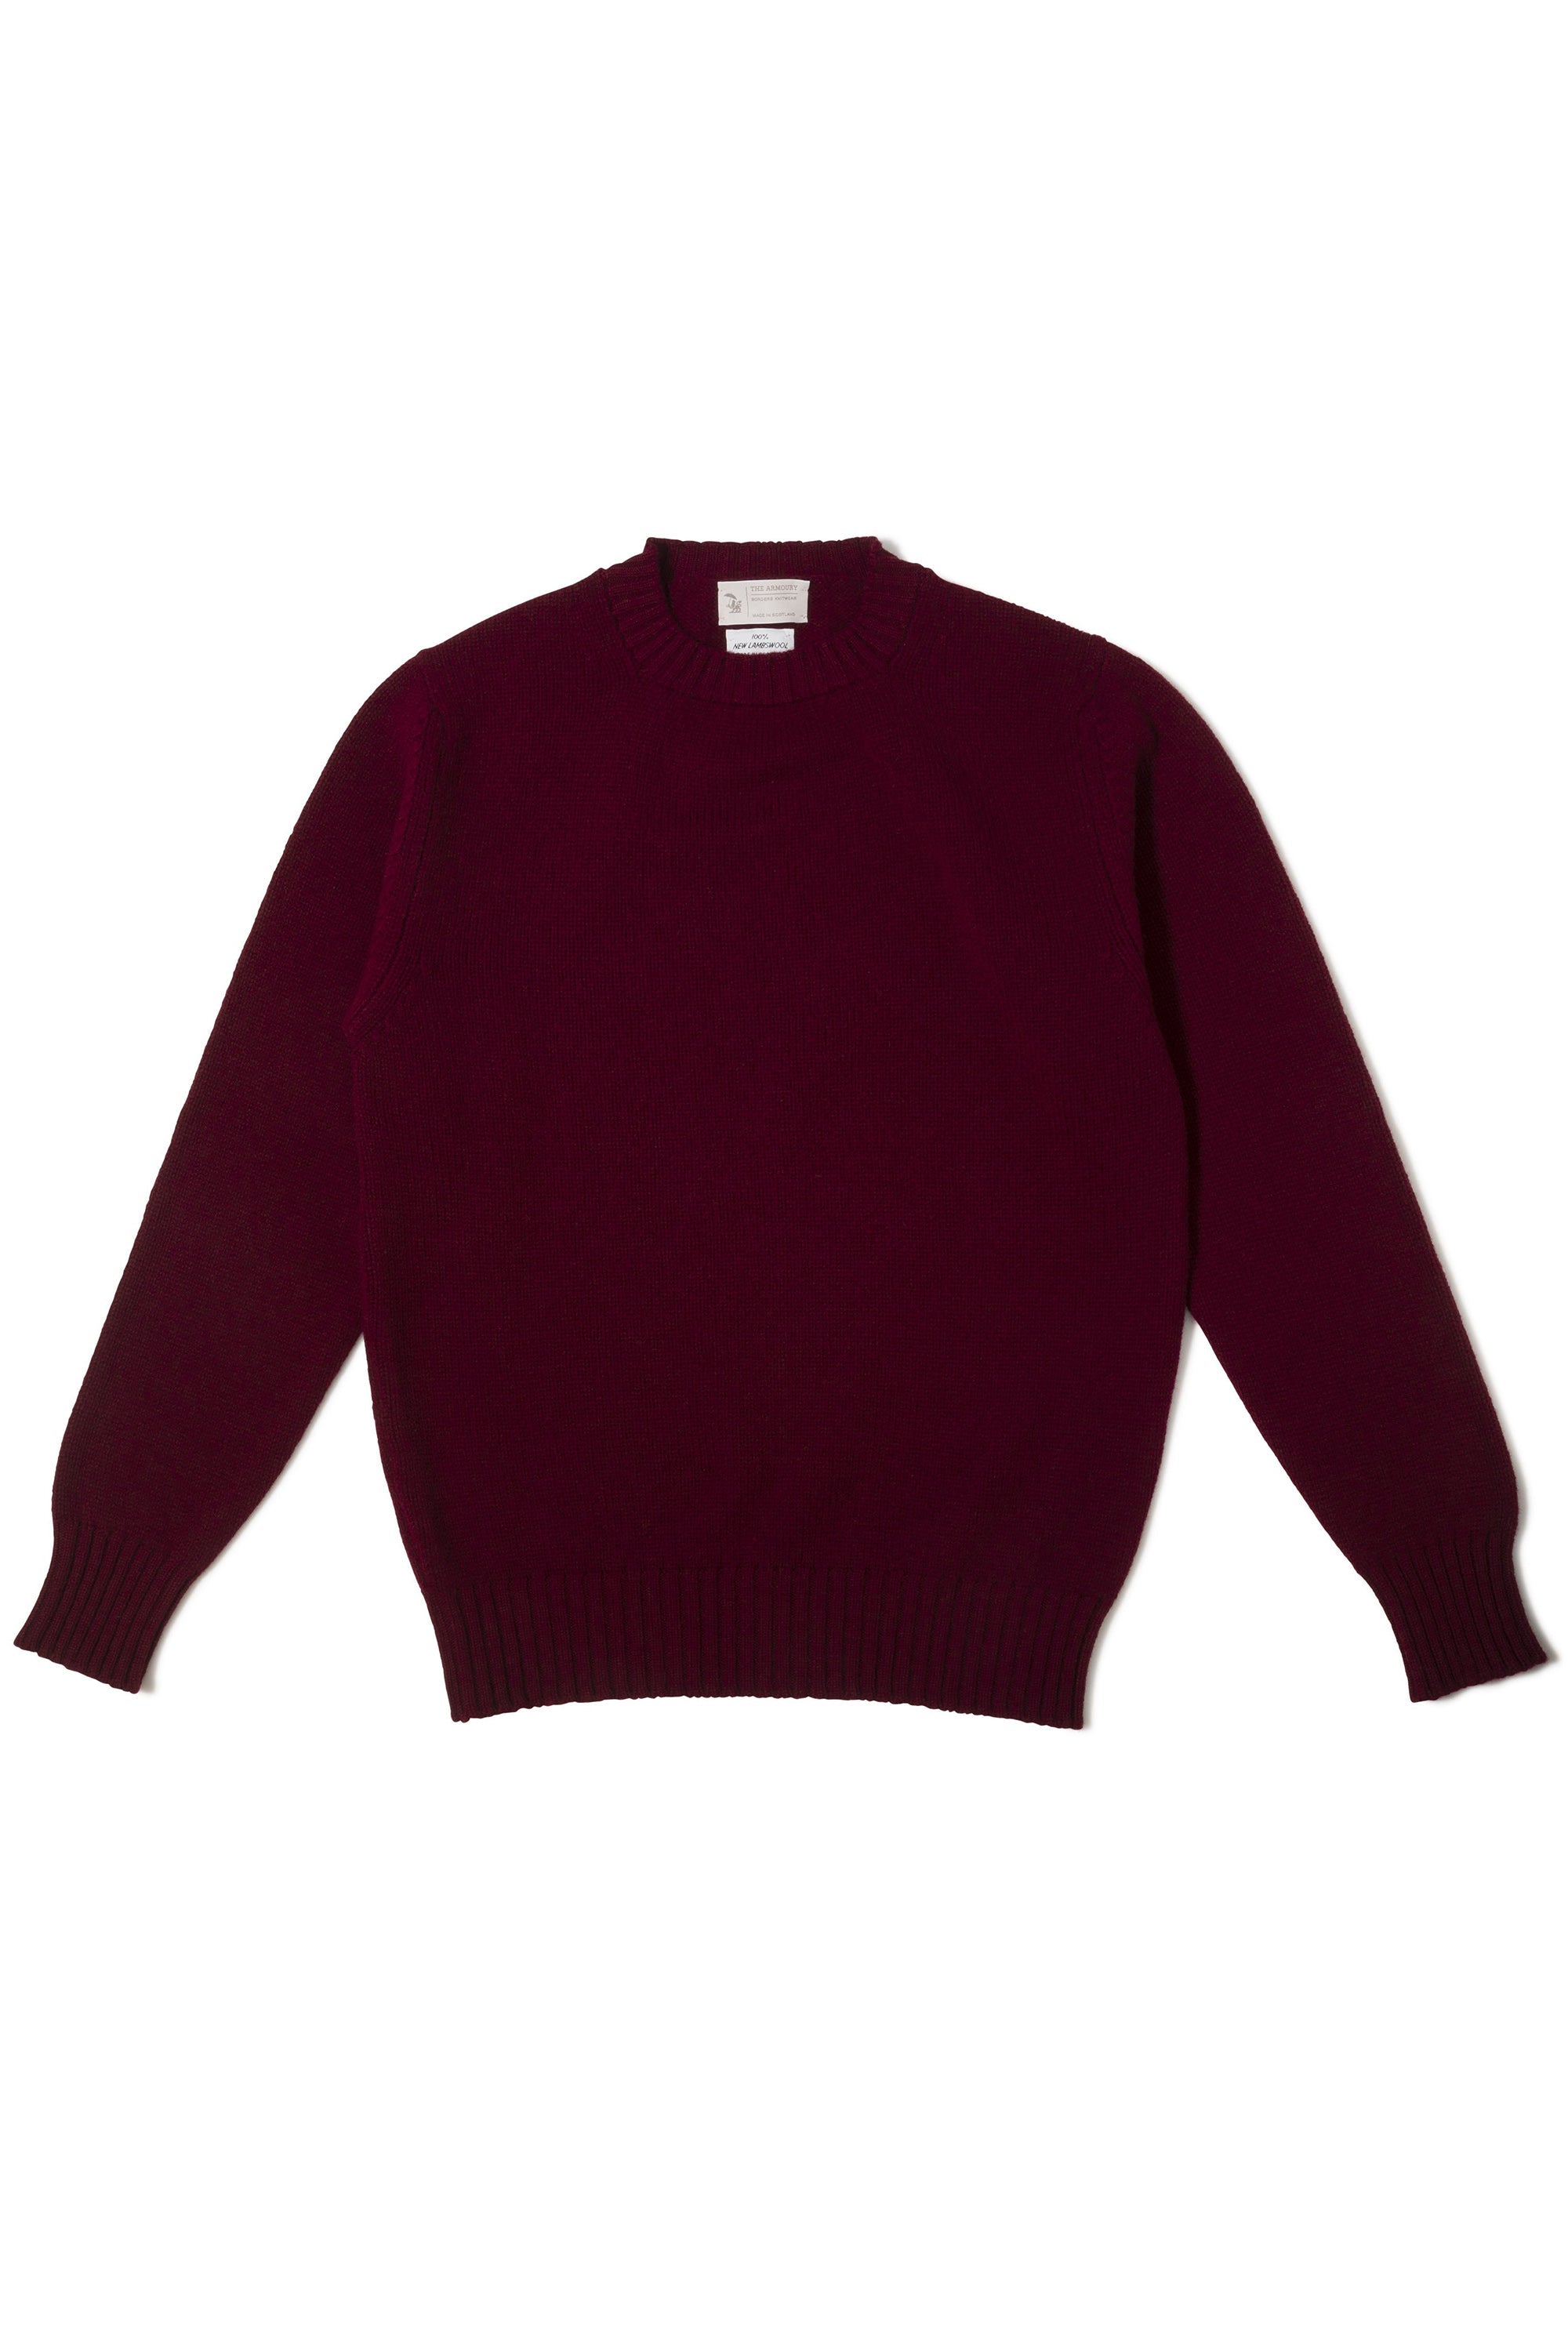 The Armoury Burgundy 4-ply Lambswool Crewneck Sweater